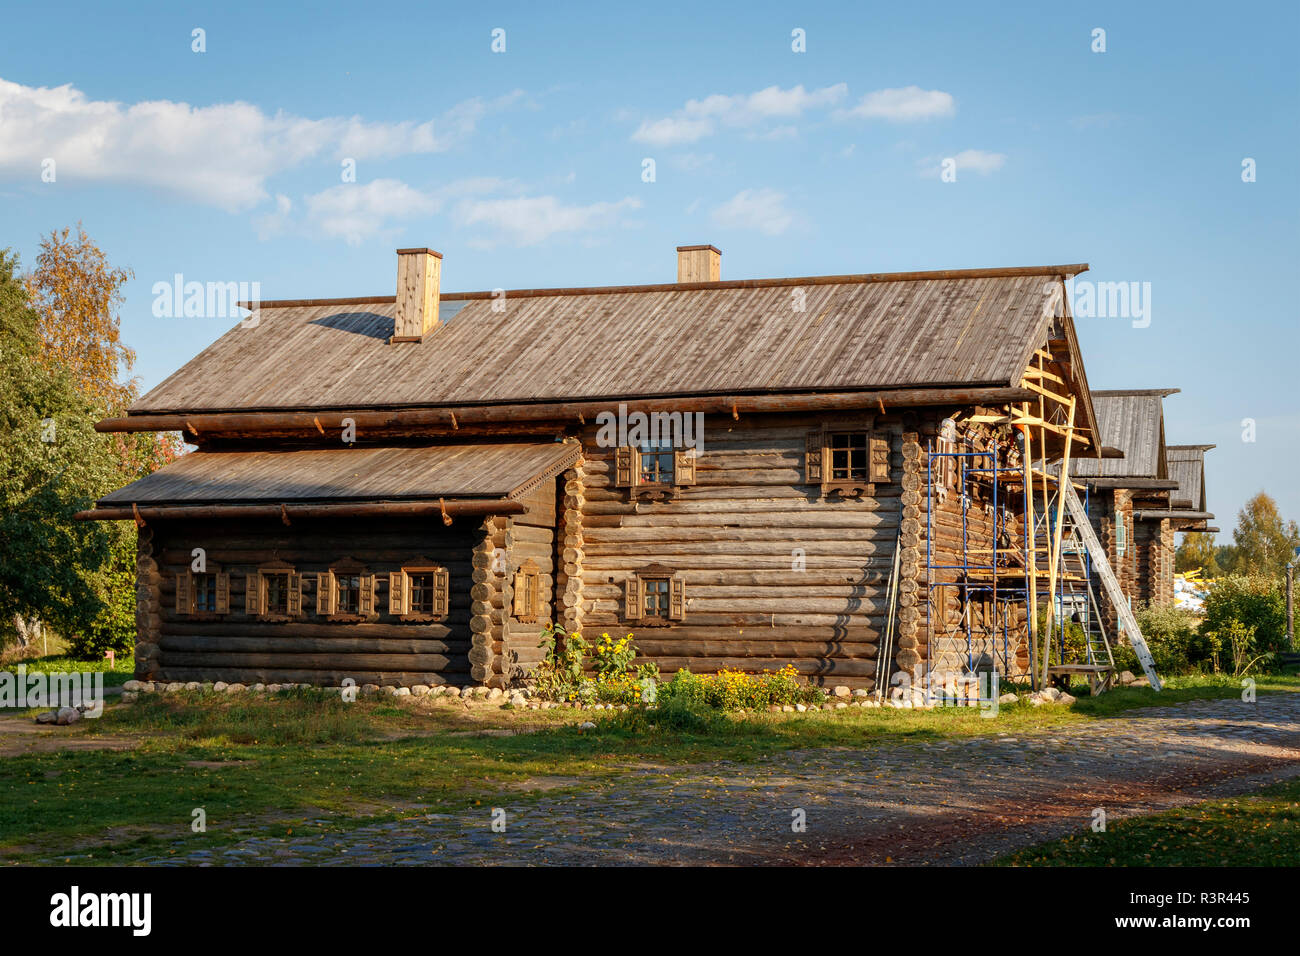 A traditional multi-purpose wooden building undergoes renovation in Verkhniye Mandrogi, Russia. A craft and mueum tourist village on the Svir River. Stock Photo